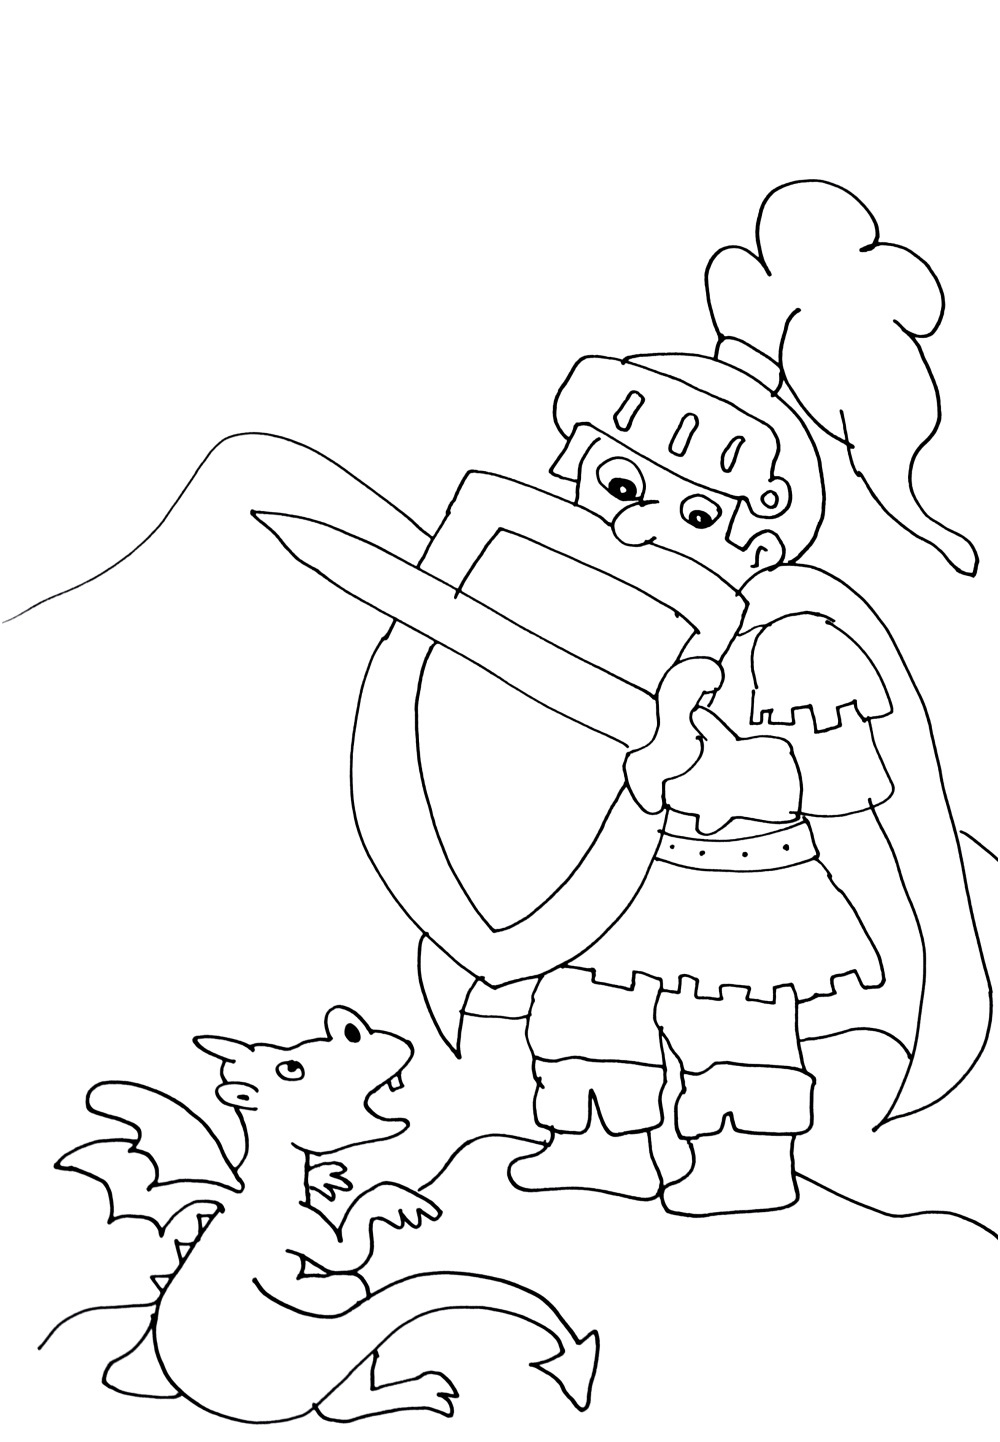 image=chevaliers et dragons coloriage chevaliers dragons 5 1